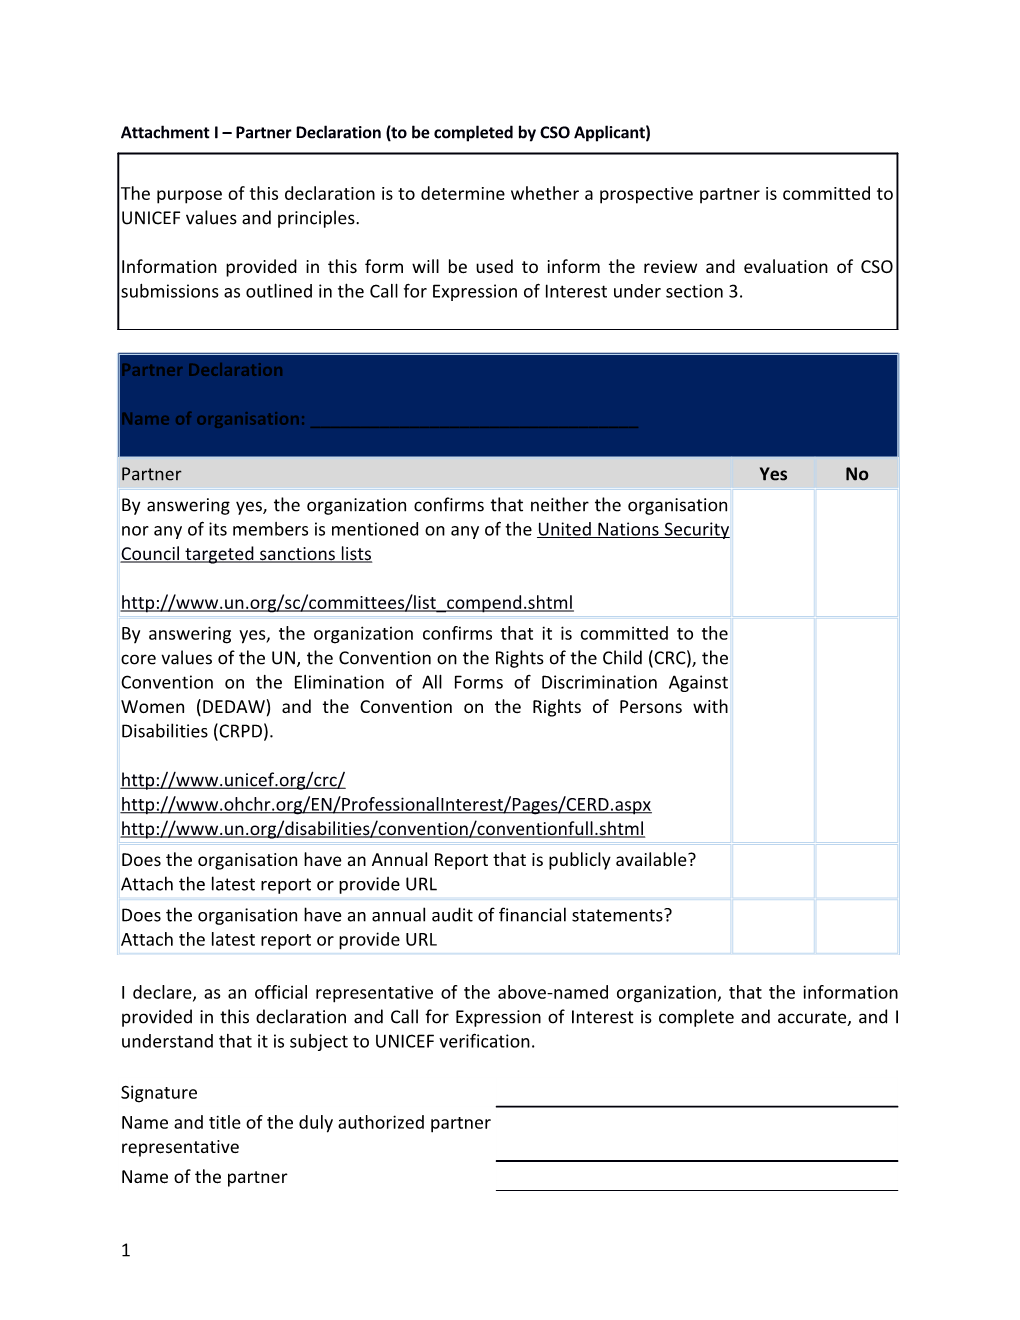 Attachment I Partner Declaration(To Be Completed by Csoapplicant)